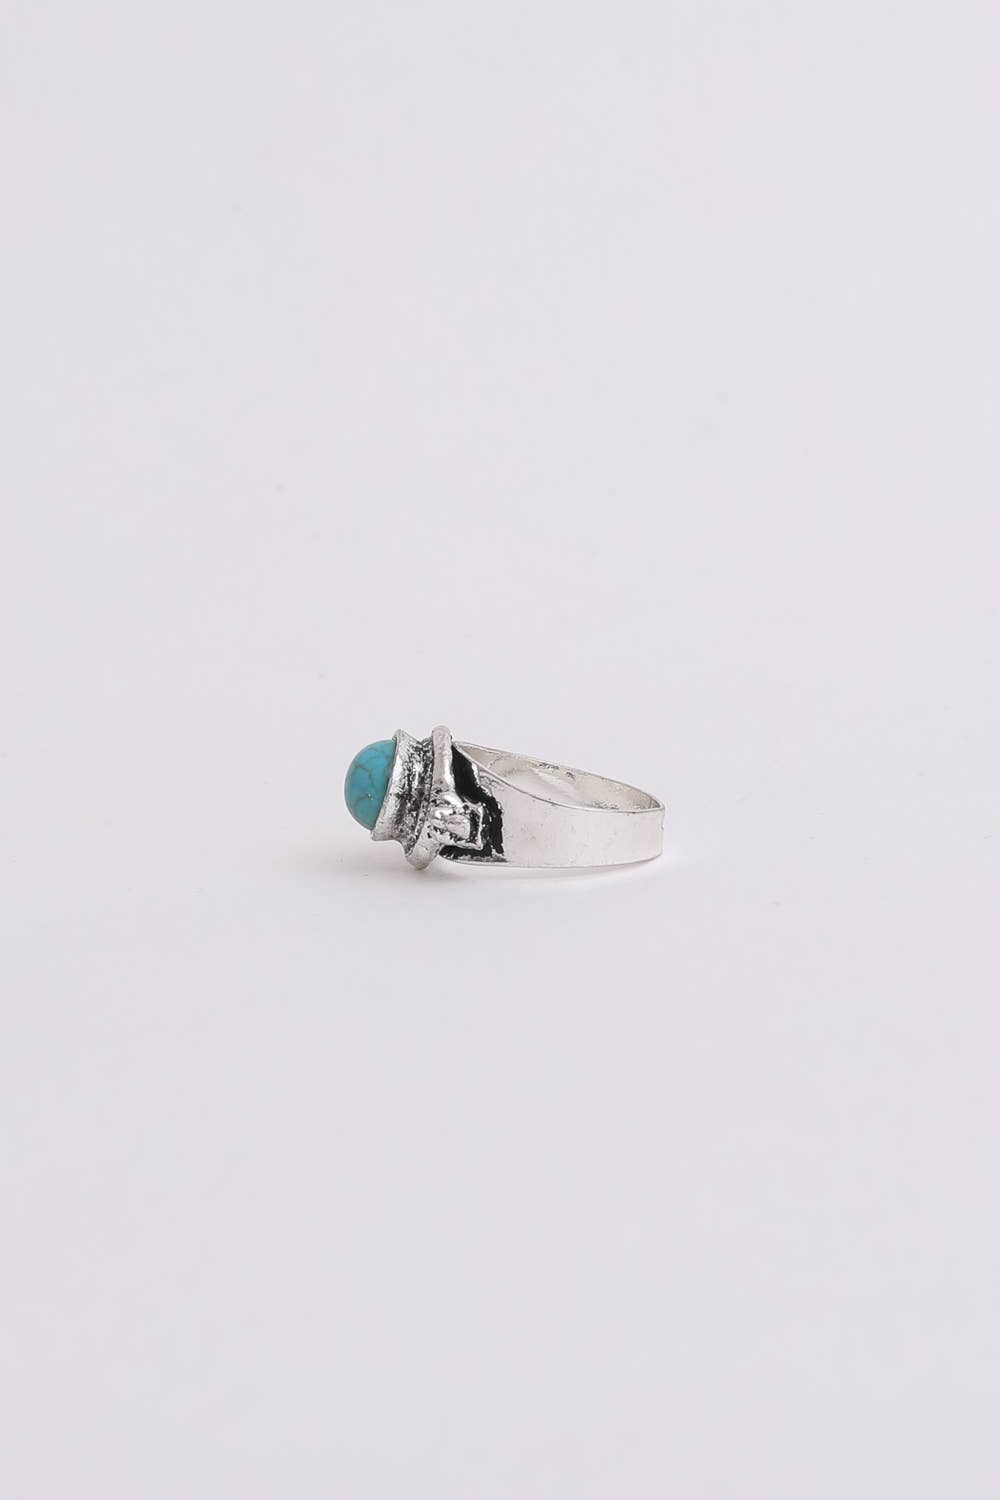 Cabochon Adjustable Turquoise Ring